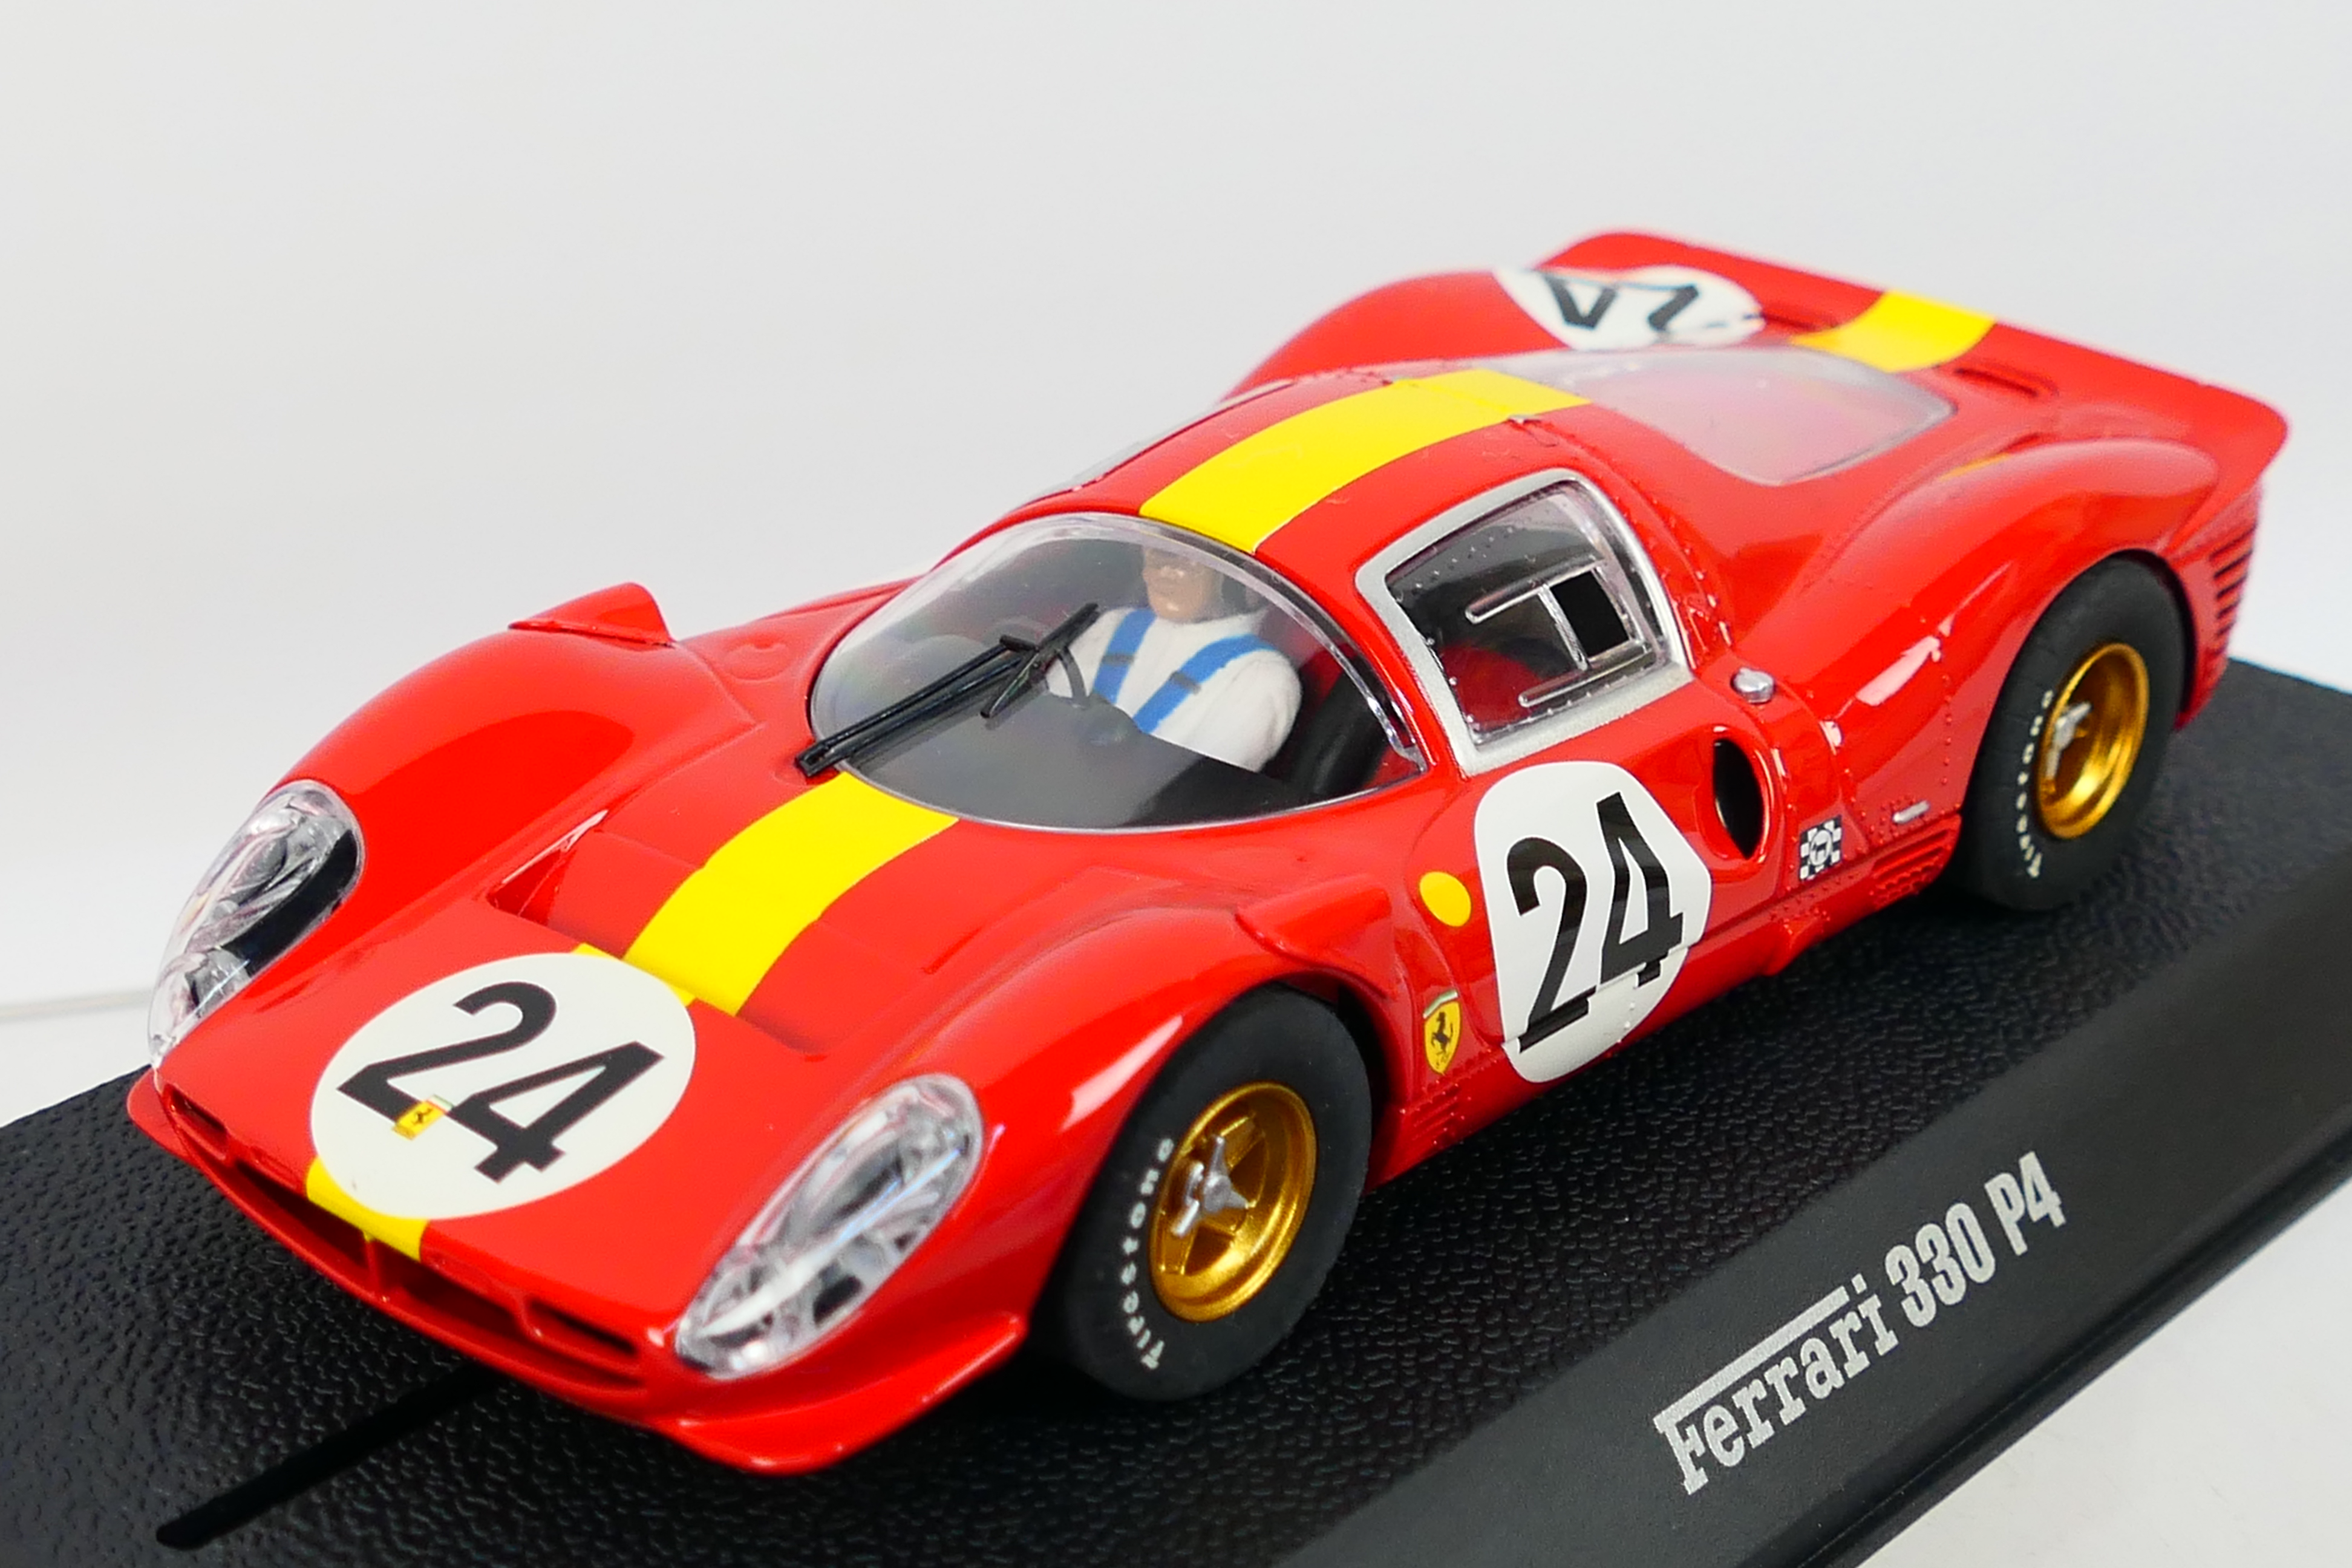 Scalextric - Two boxed Scalextric Ferrari 330 P4 slot cars. - Image 3 of 3